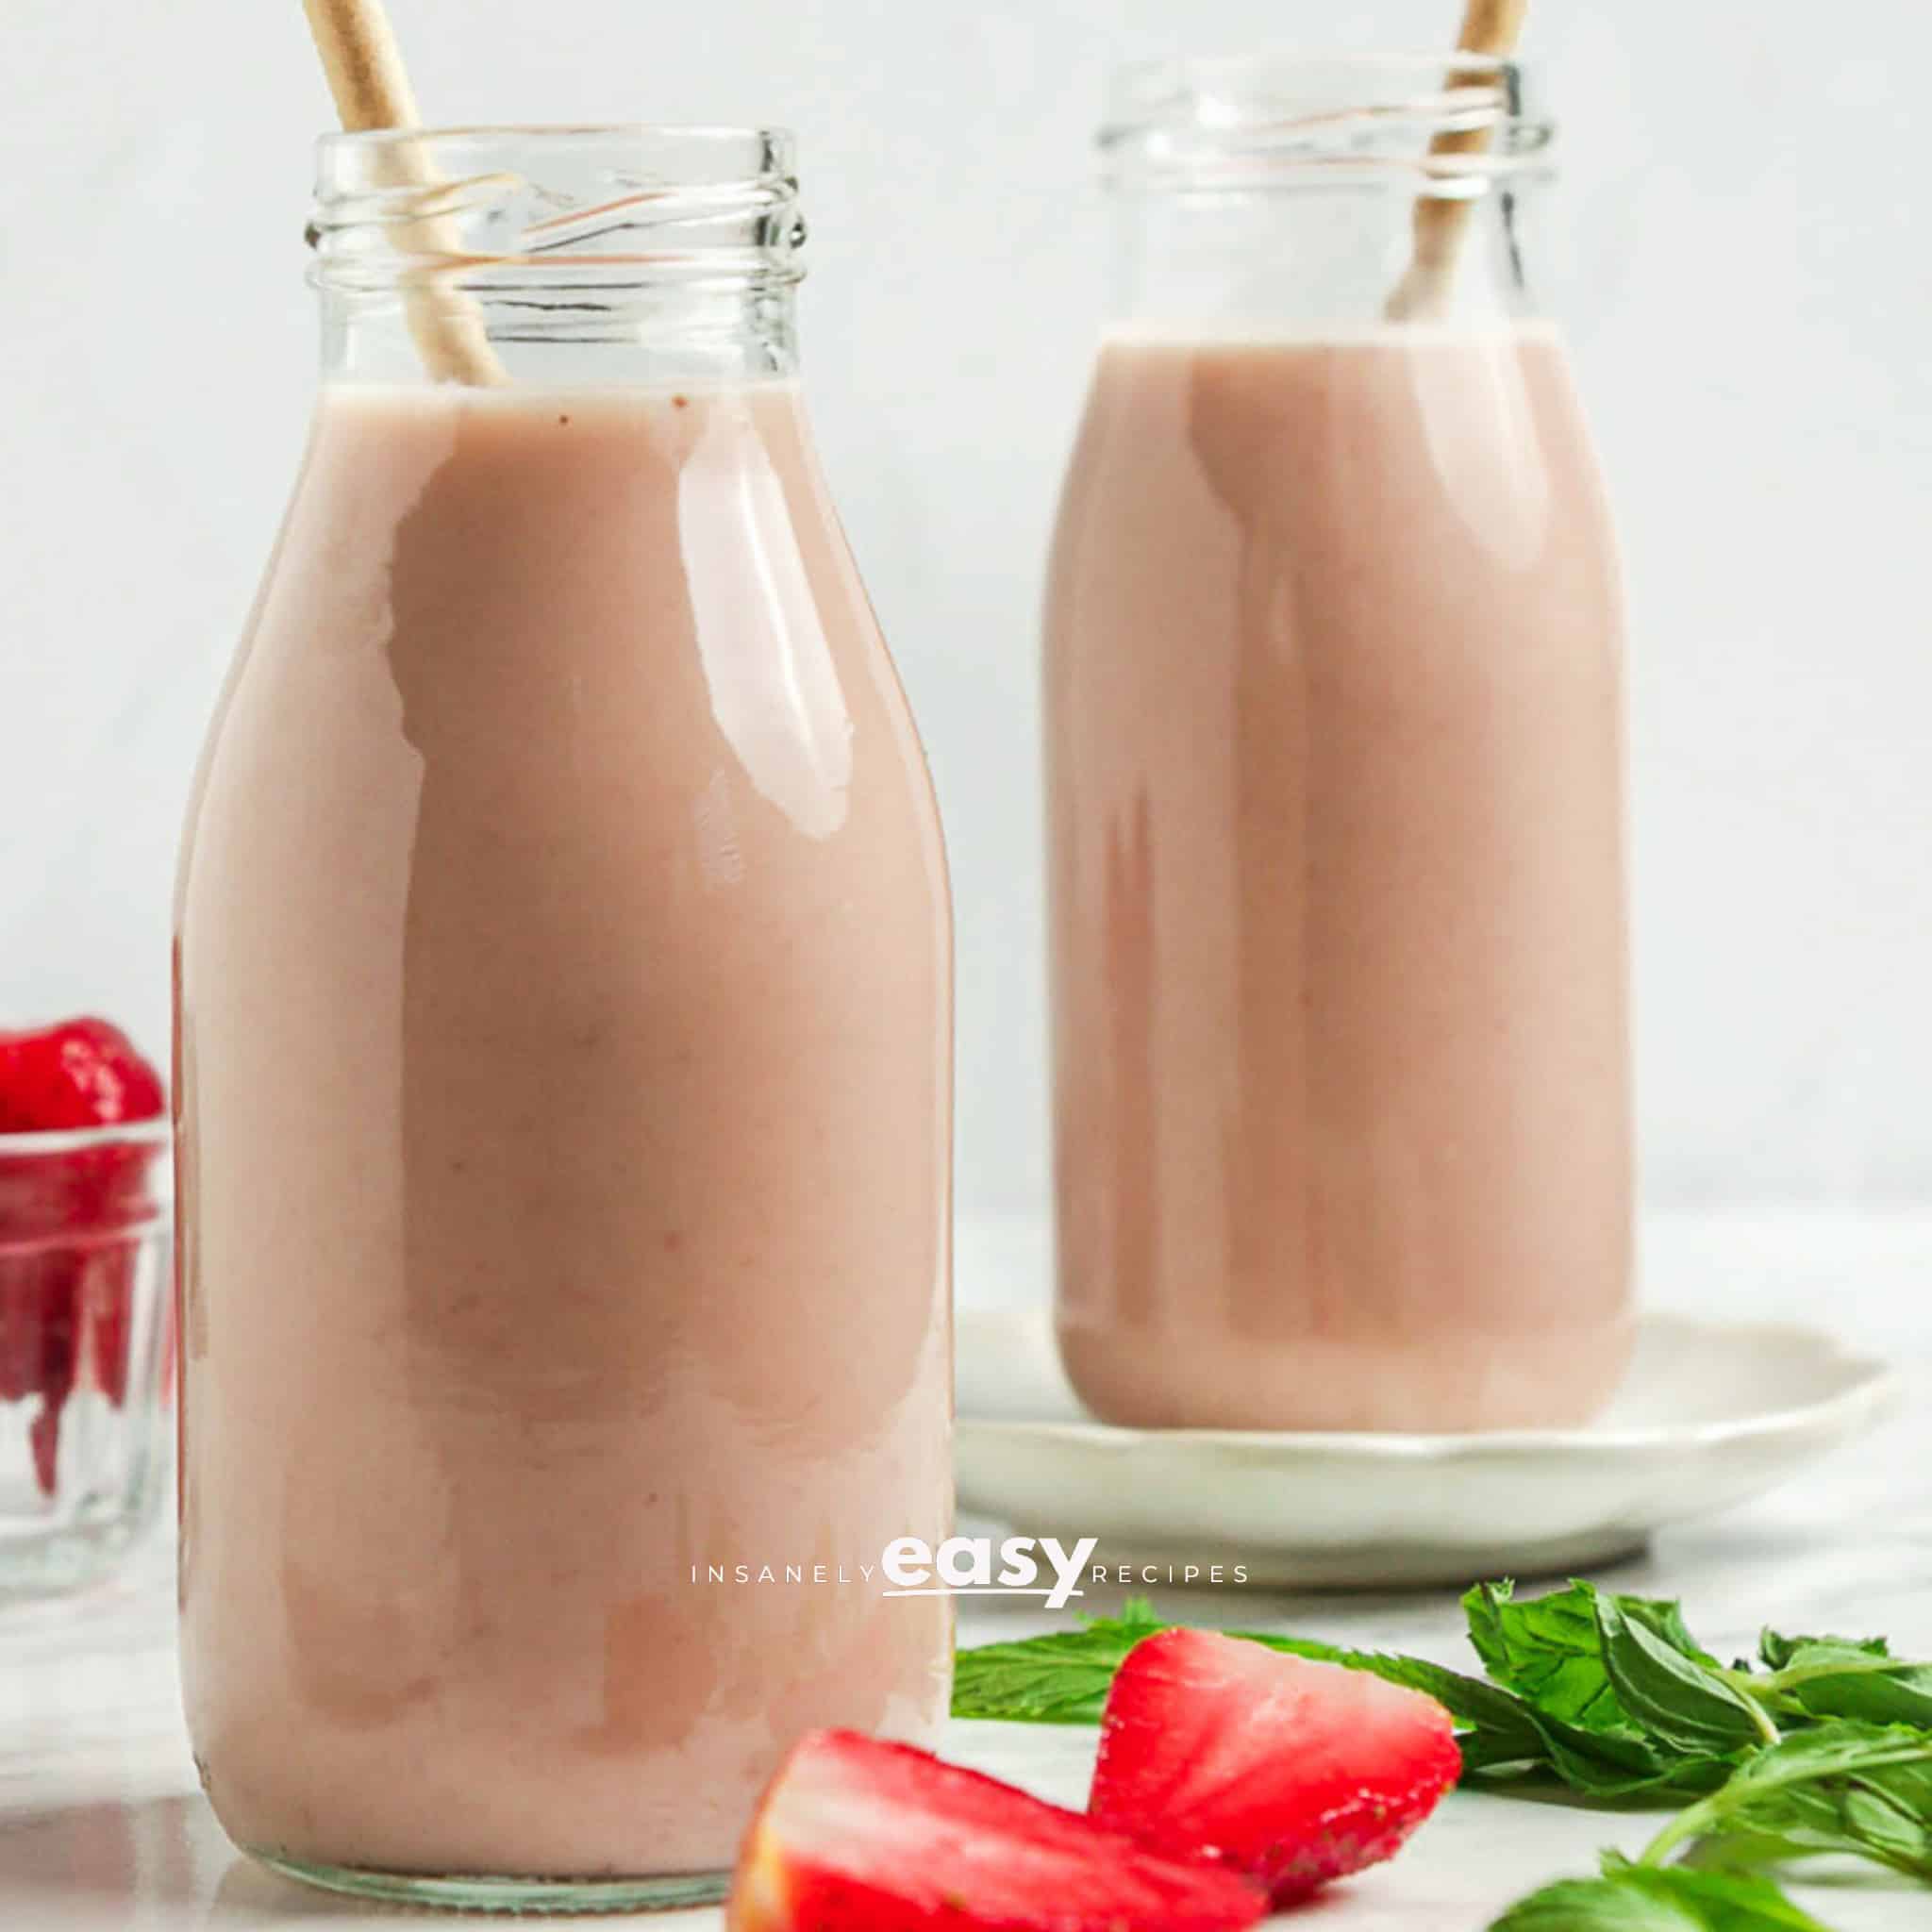 Photo of two tall glass jars filled with Strawberry Almond Milk. There are strawberries by the jars and straws in the jars.